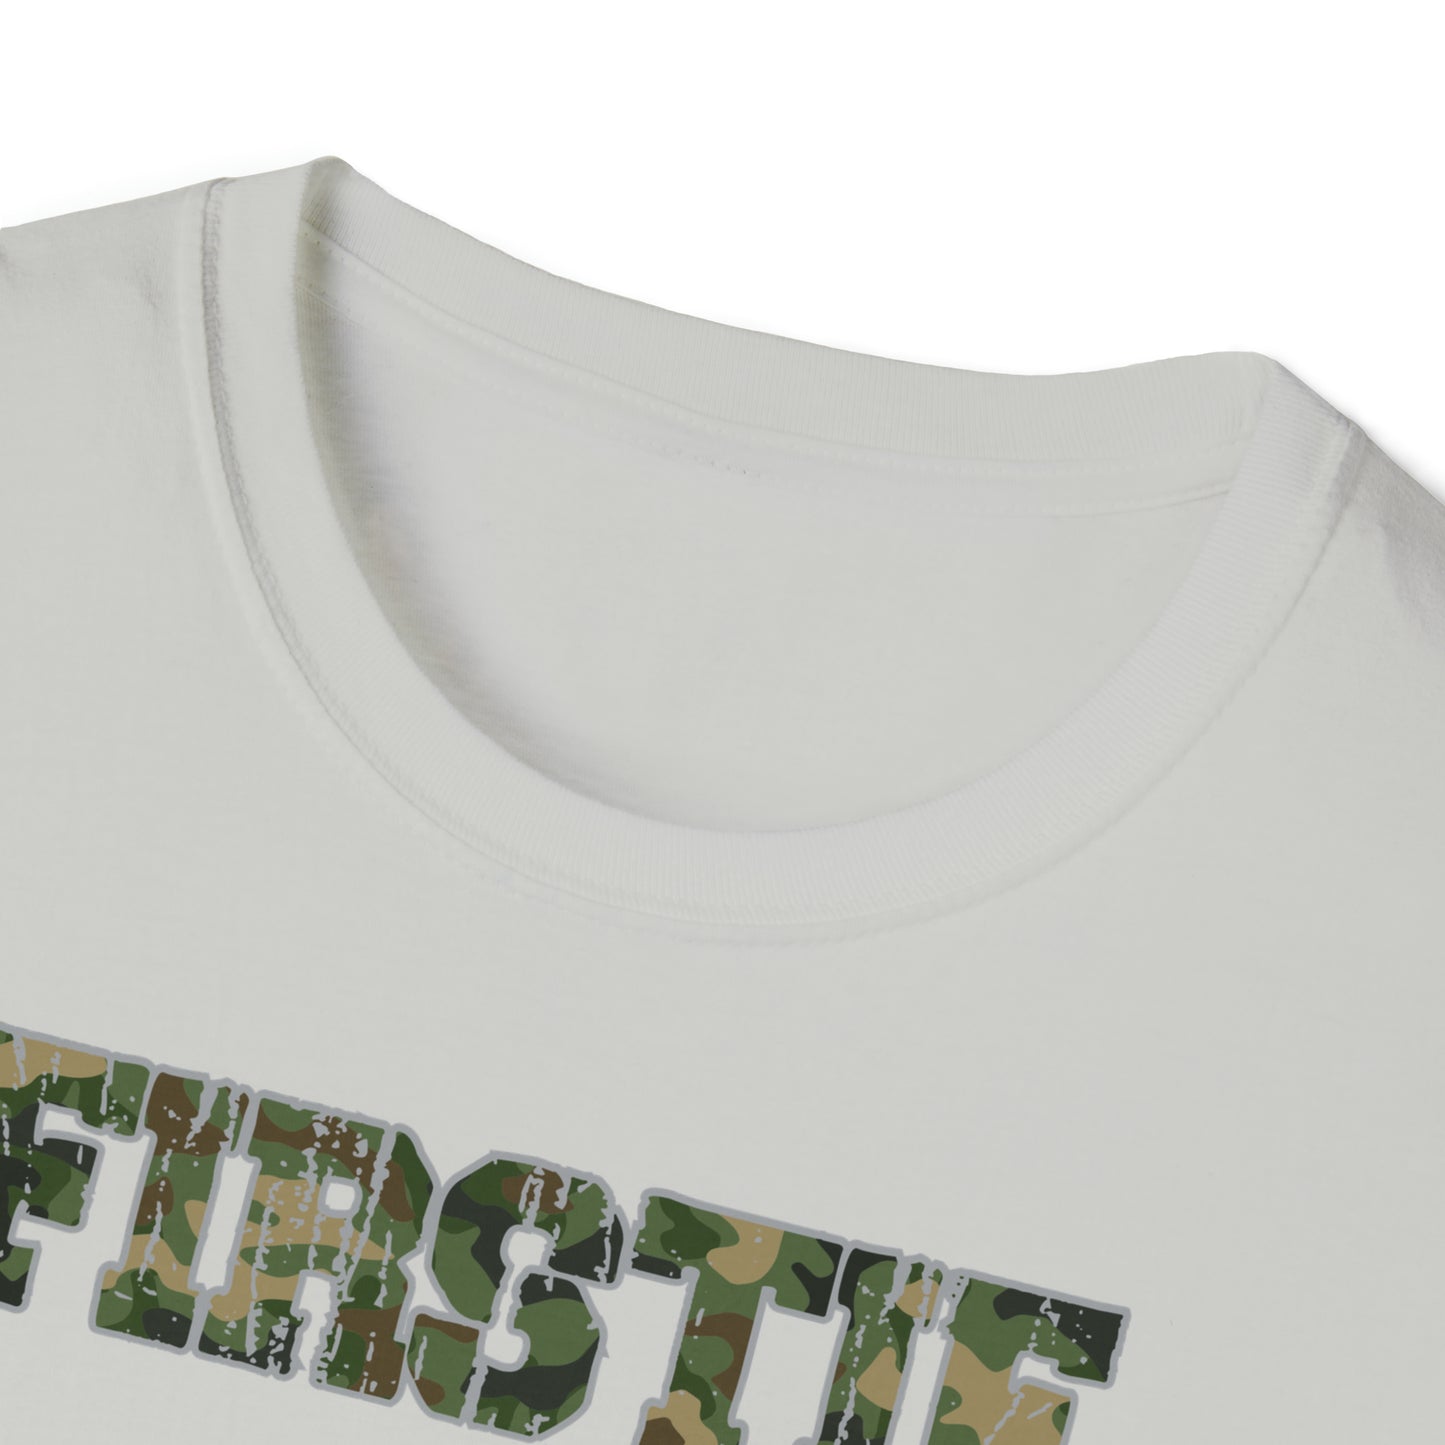 FIRSTIE MOM | Unisex Softstyle T-Shirt